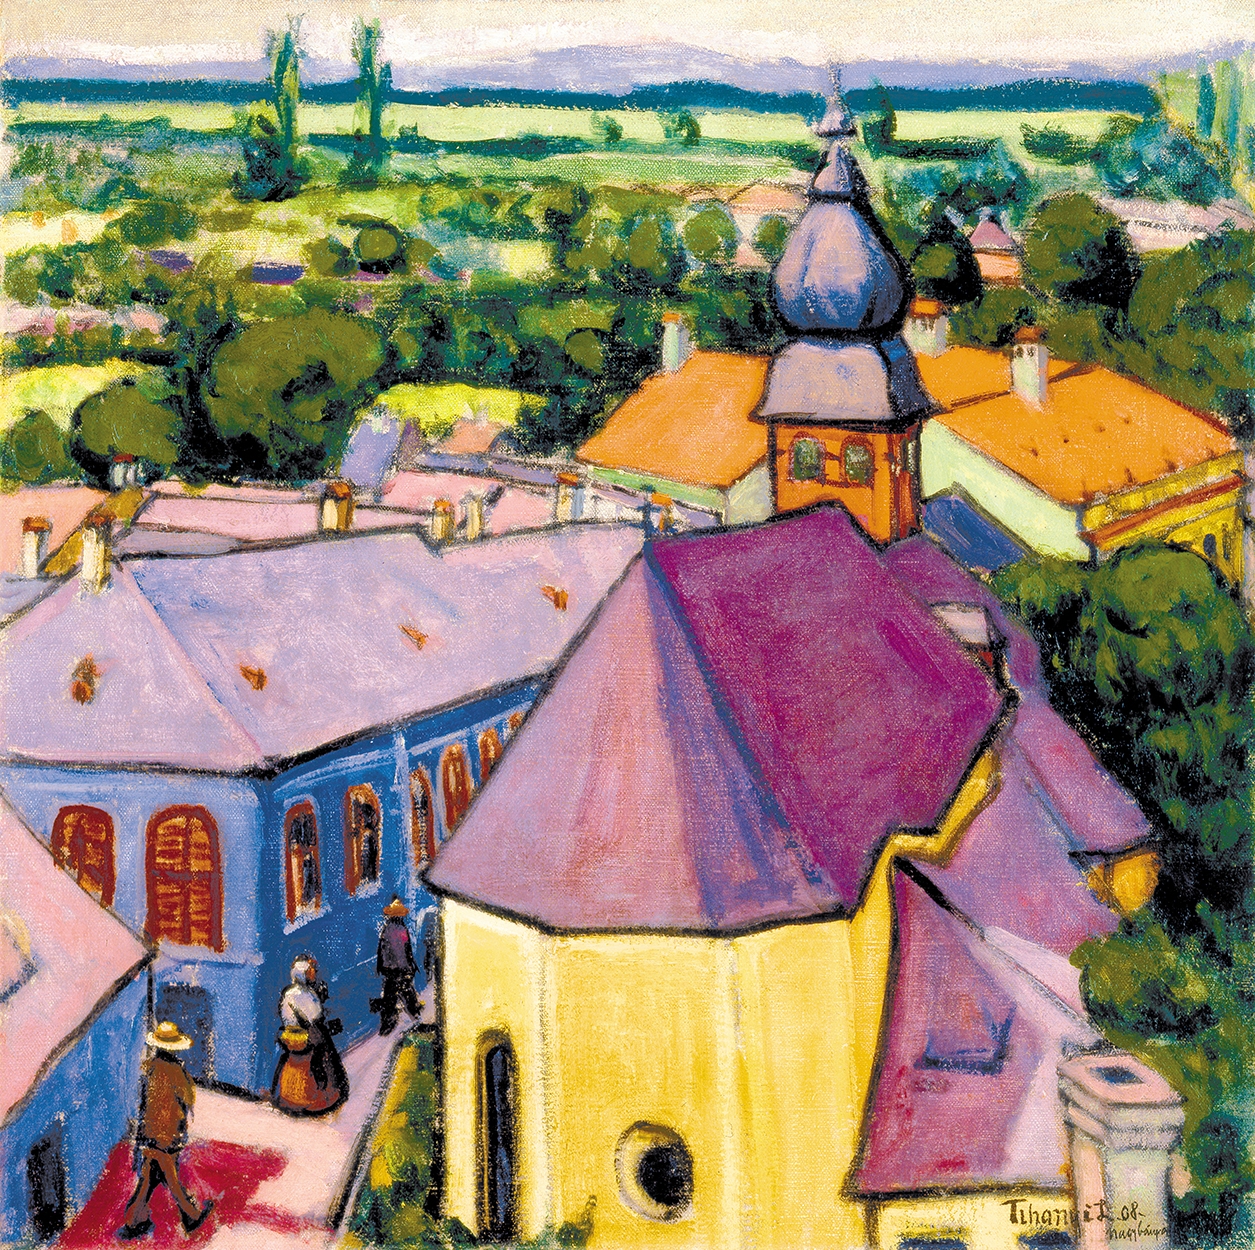 Tihanyi Lajos (1885-1938) Detail of Baia Mare (The View of the St. Michael Church), 1908